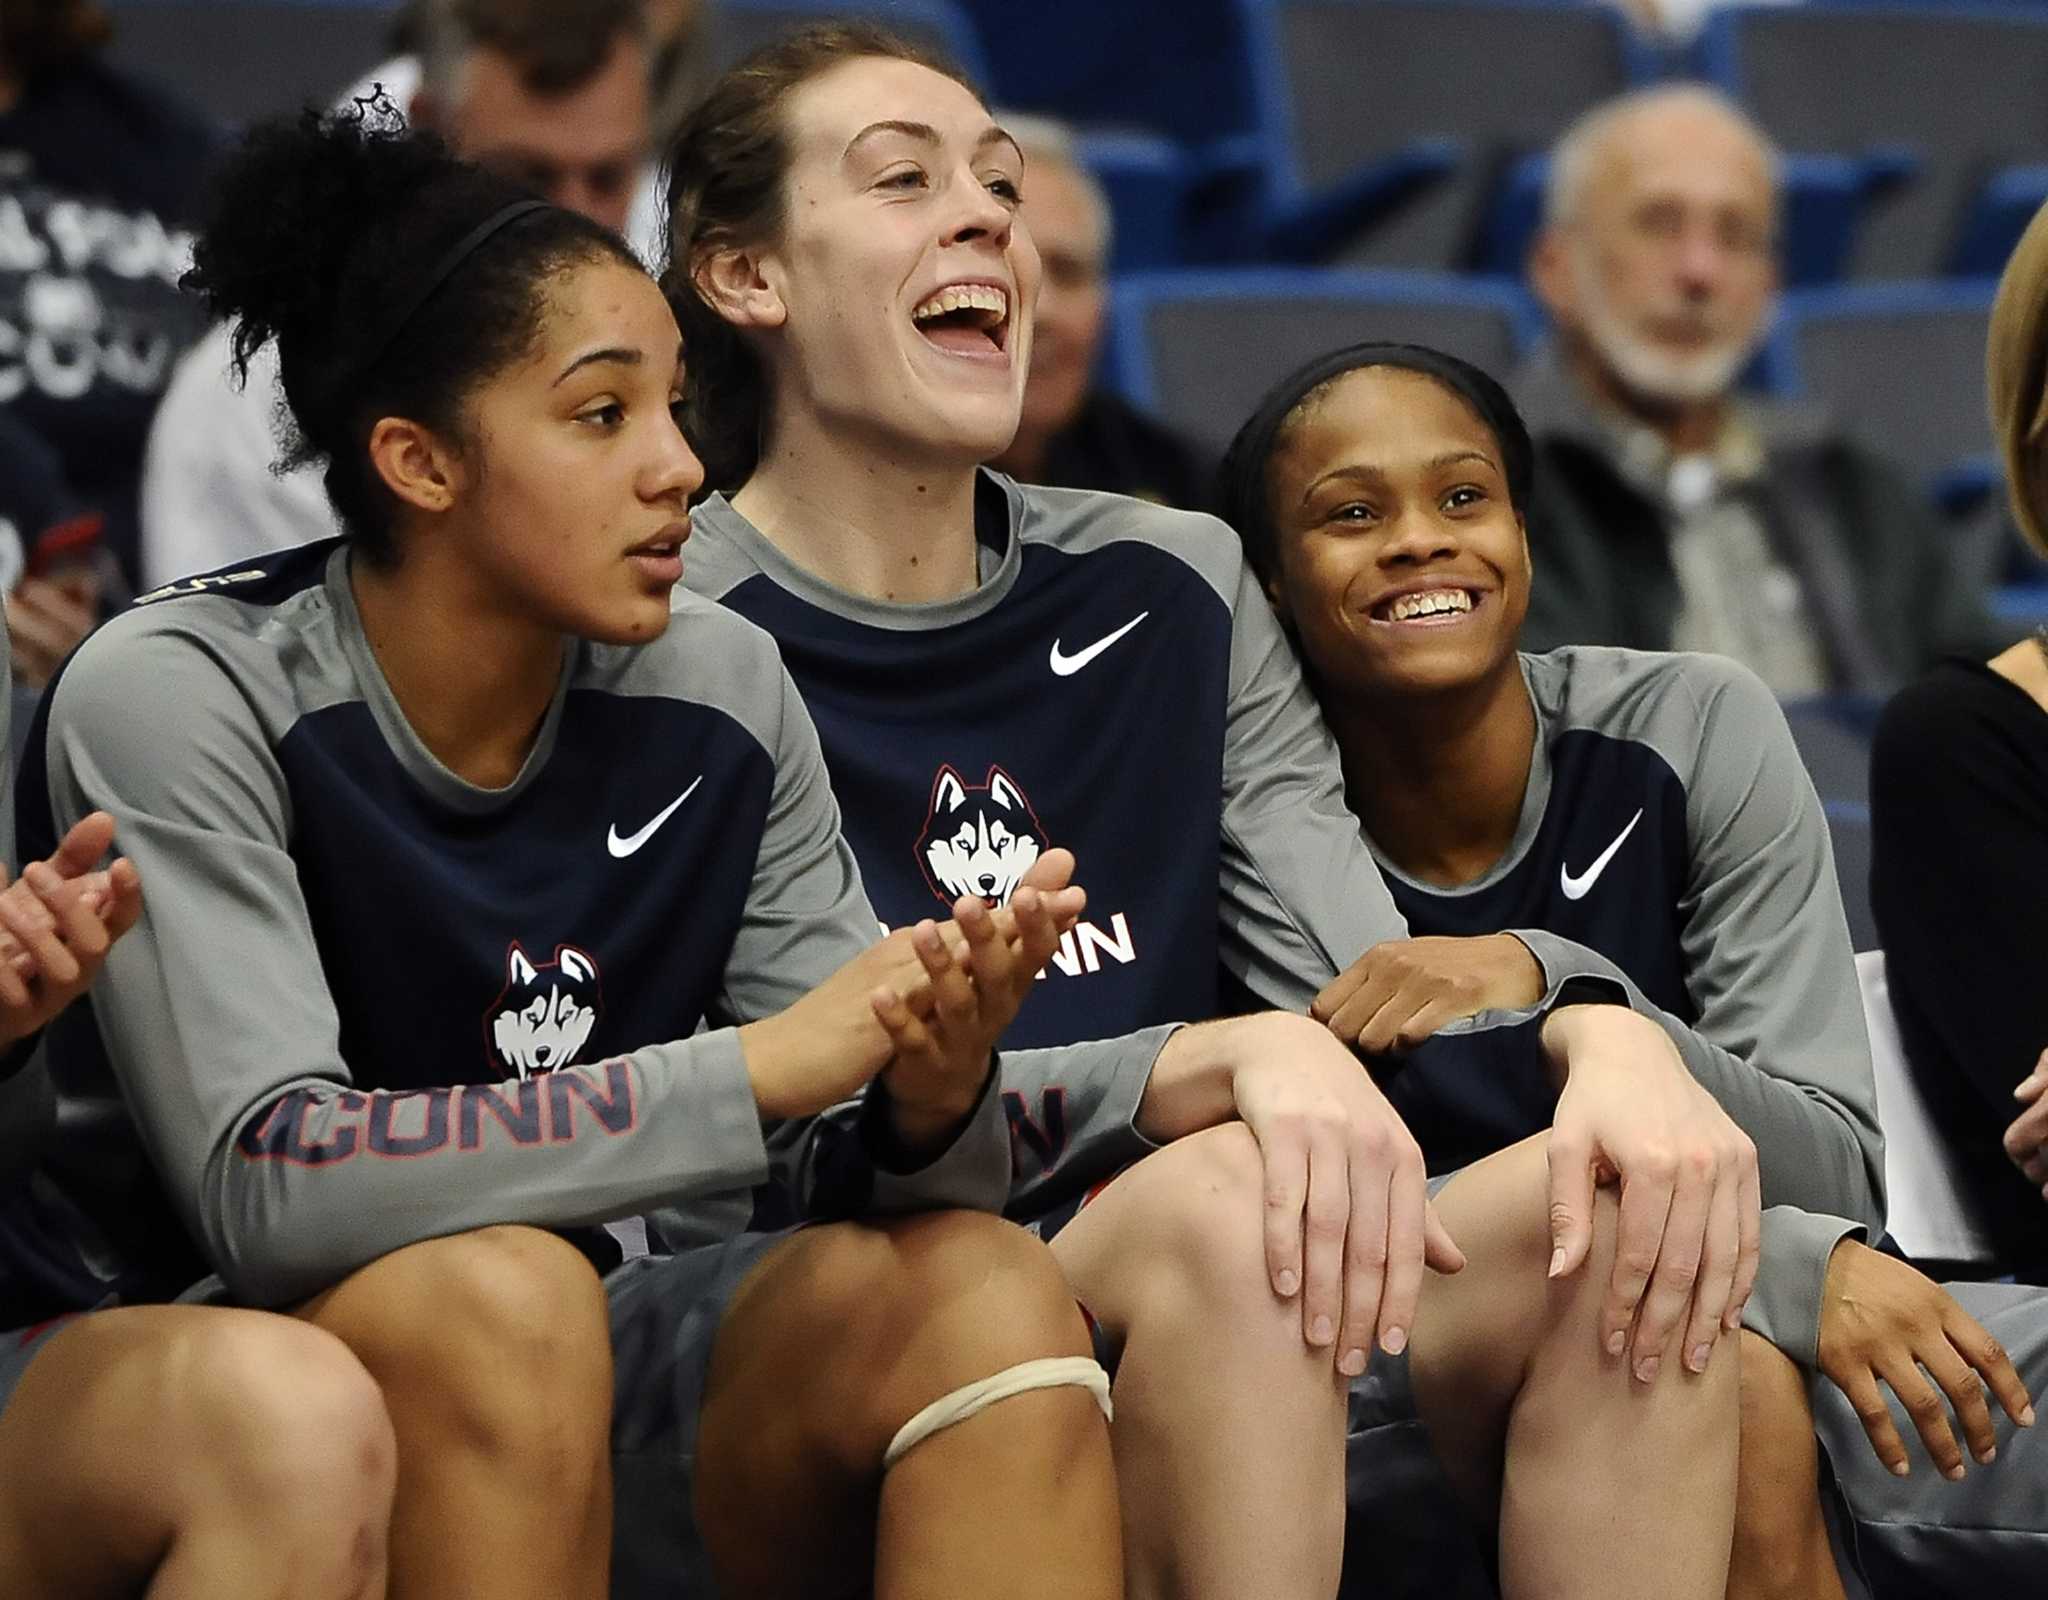 UConn’s Gabby Williams shows off expanded game in exhibition win